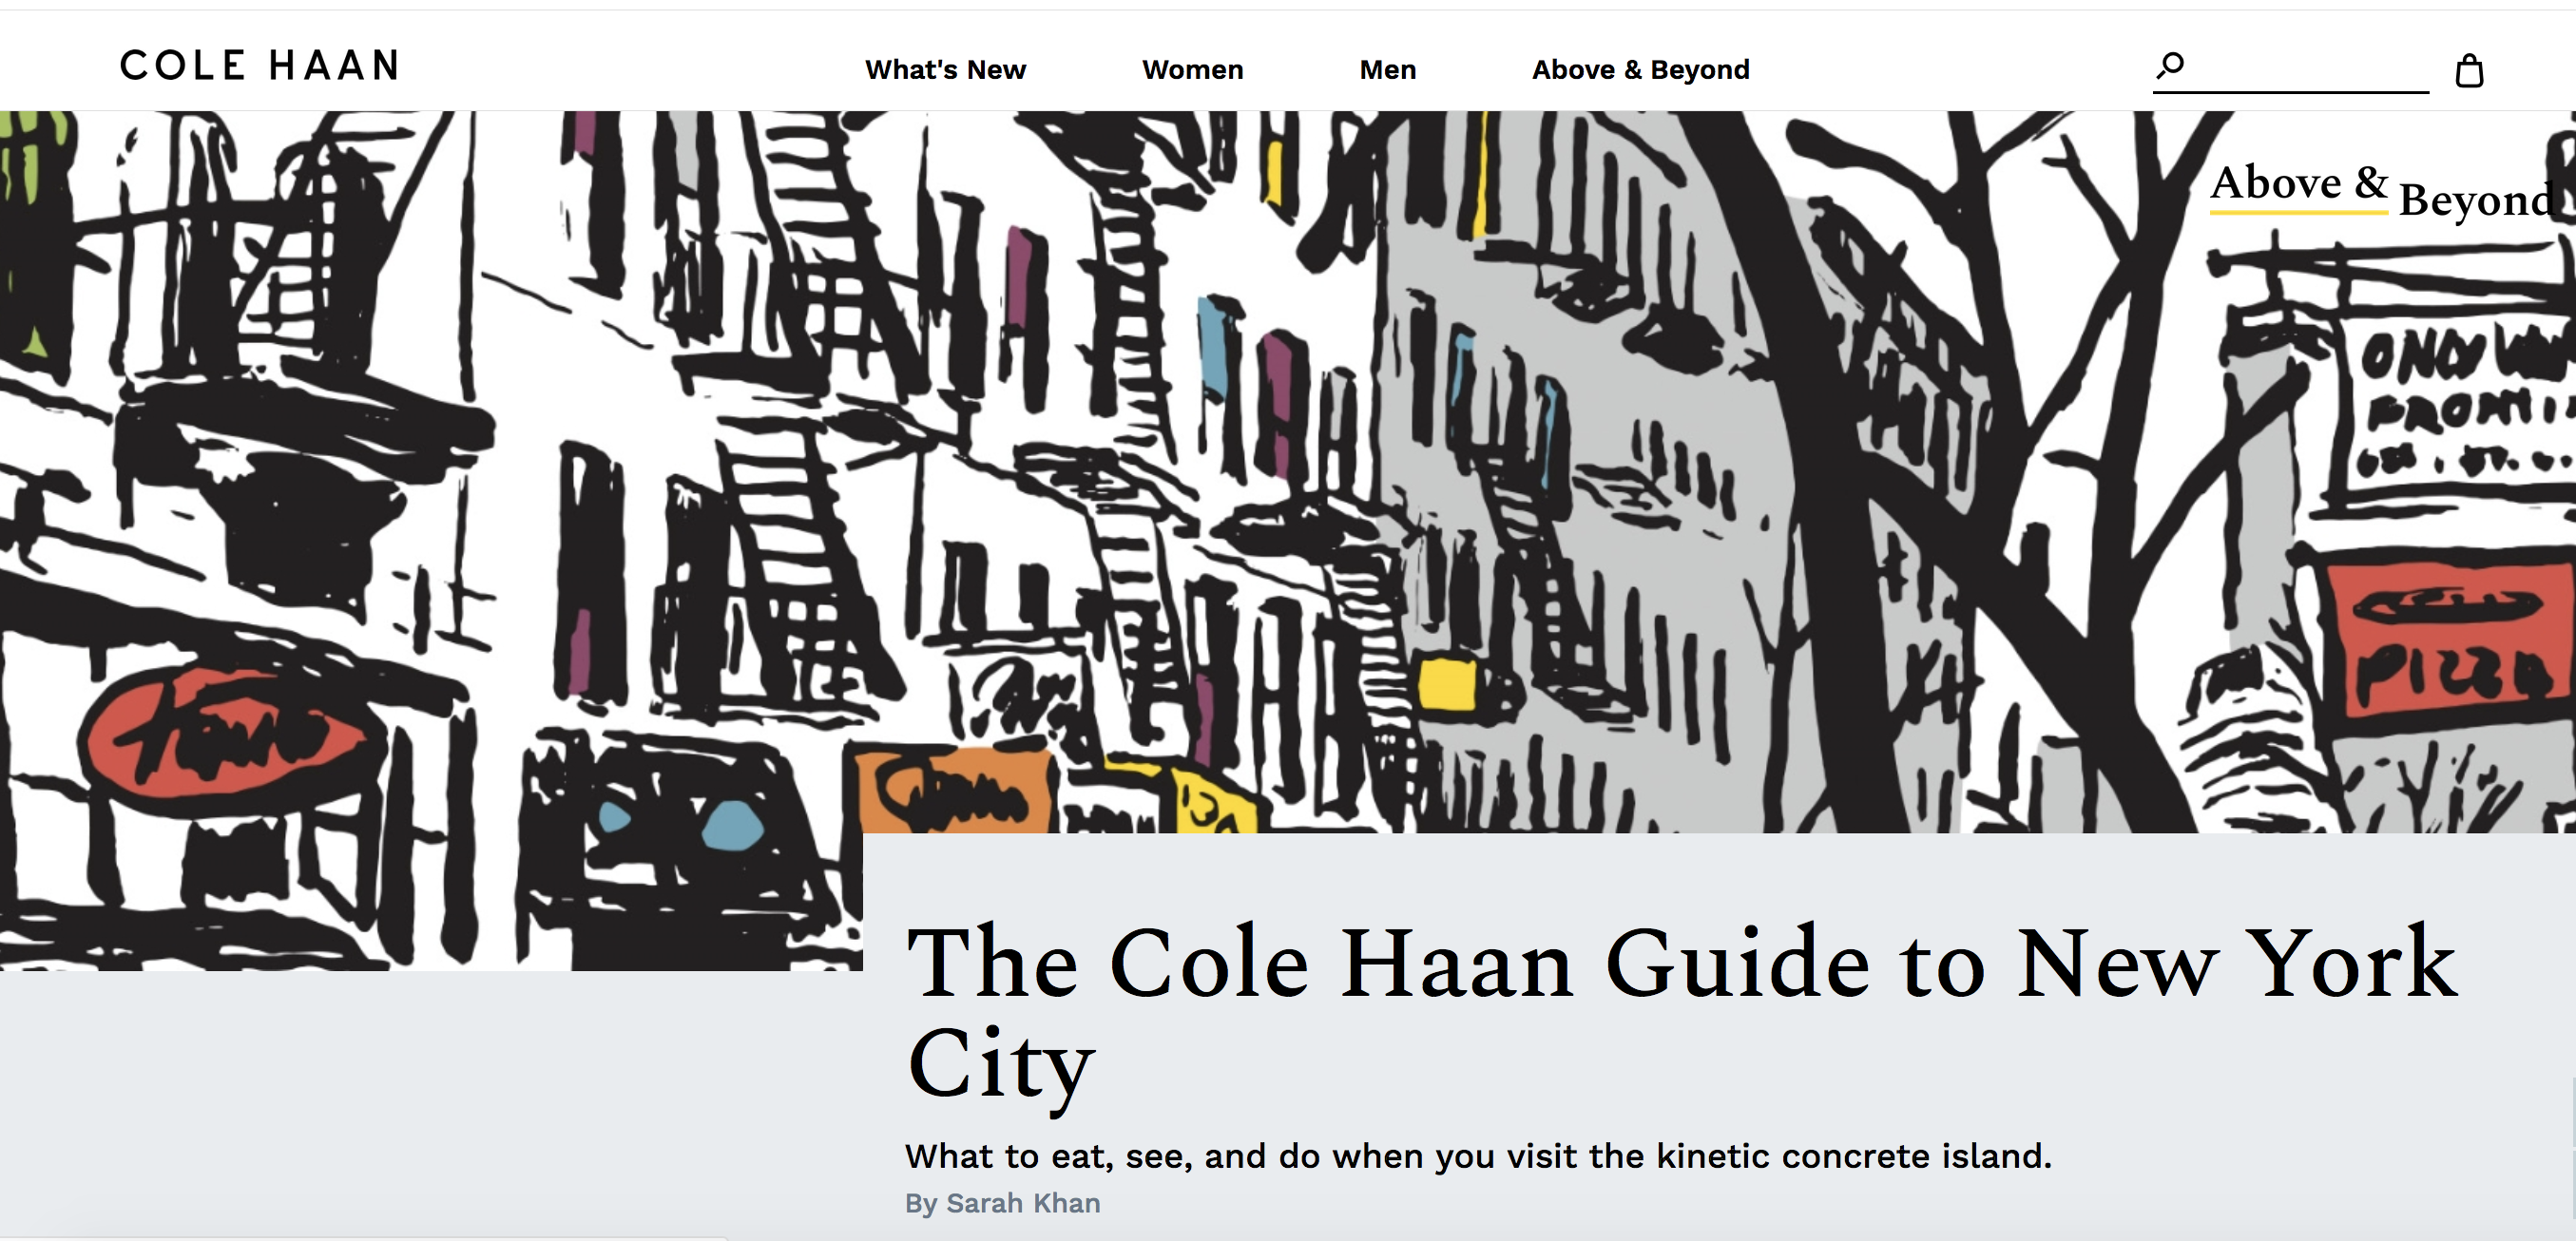 The Cole Haan Guide to New York City